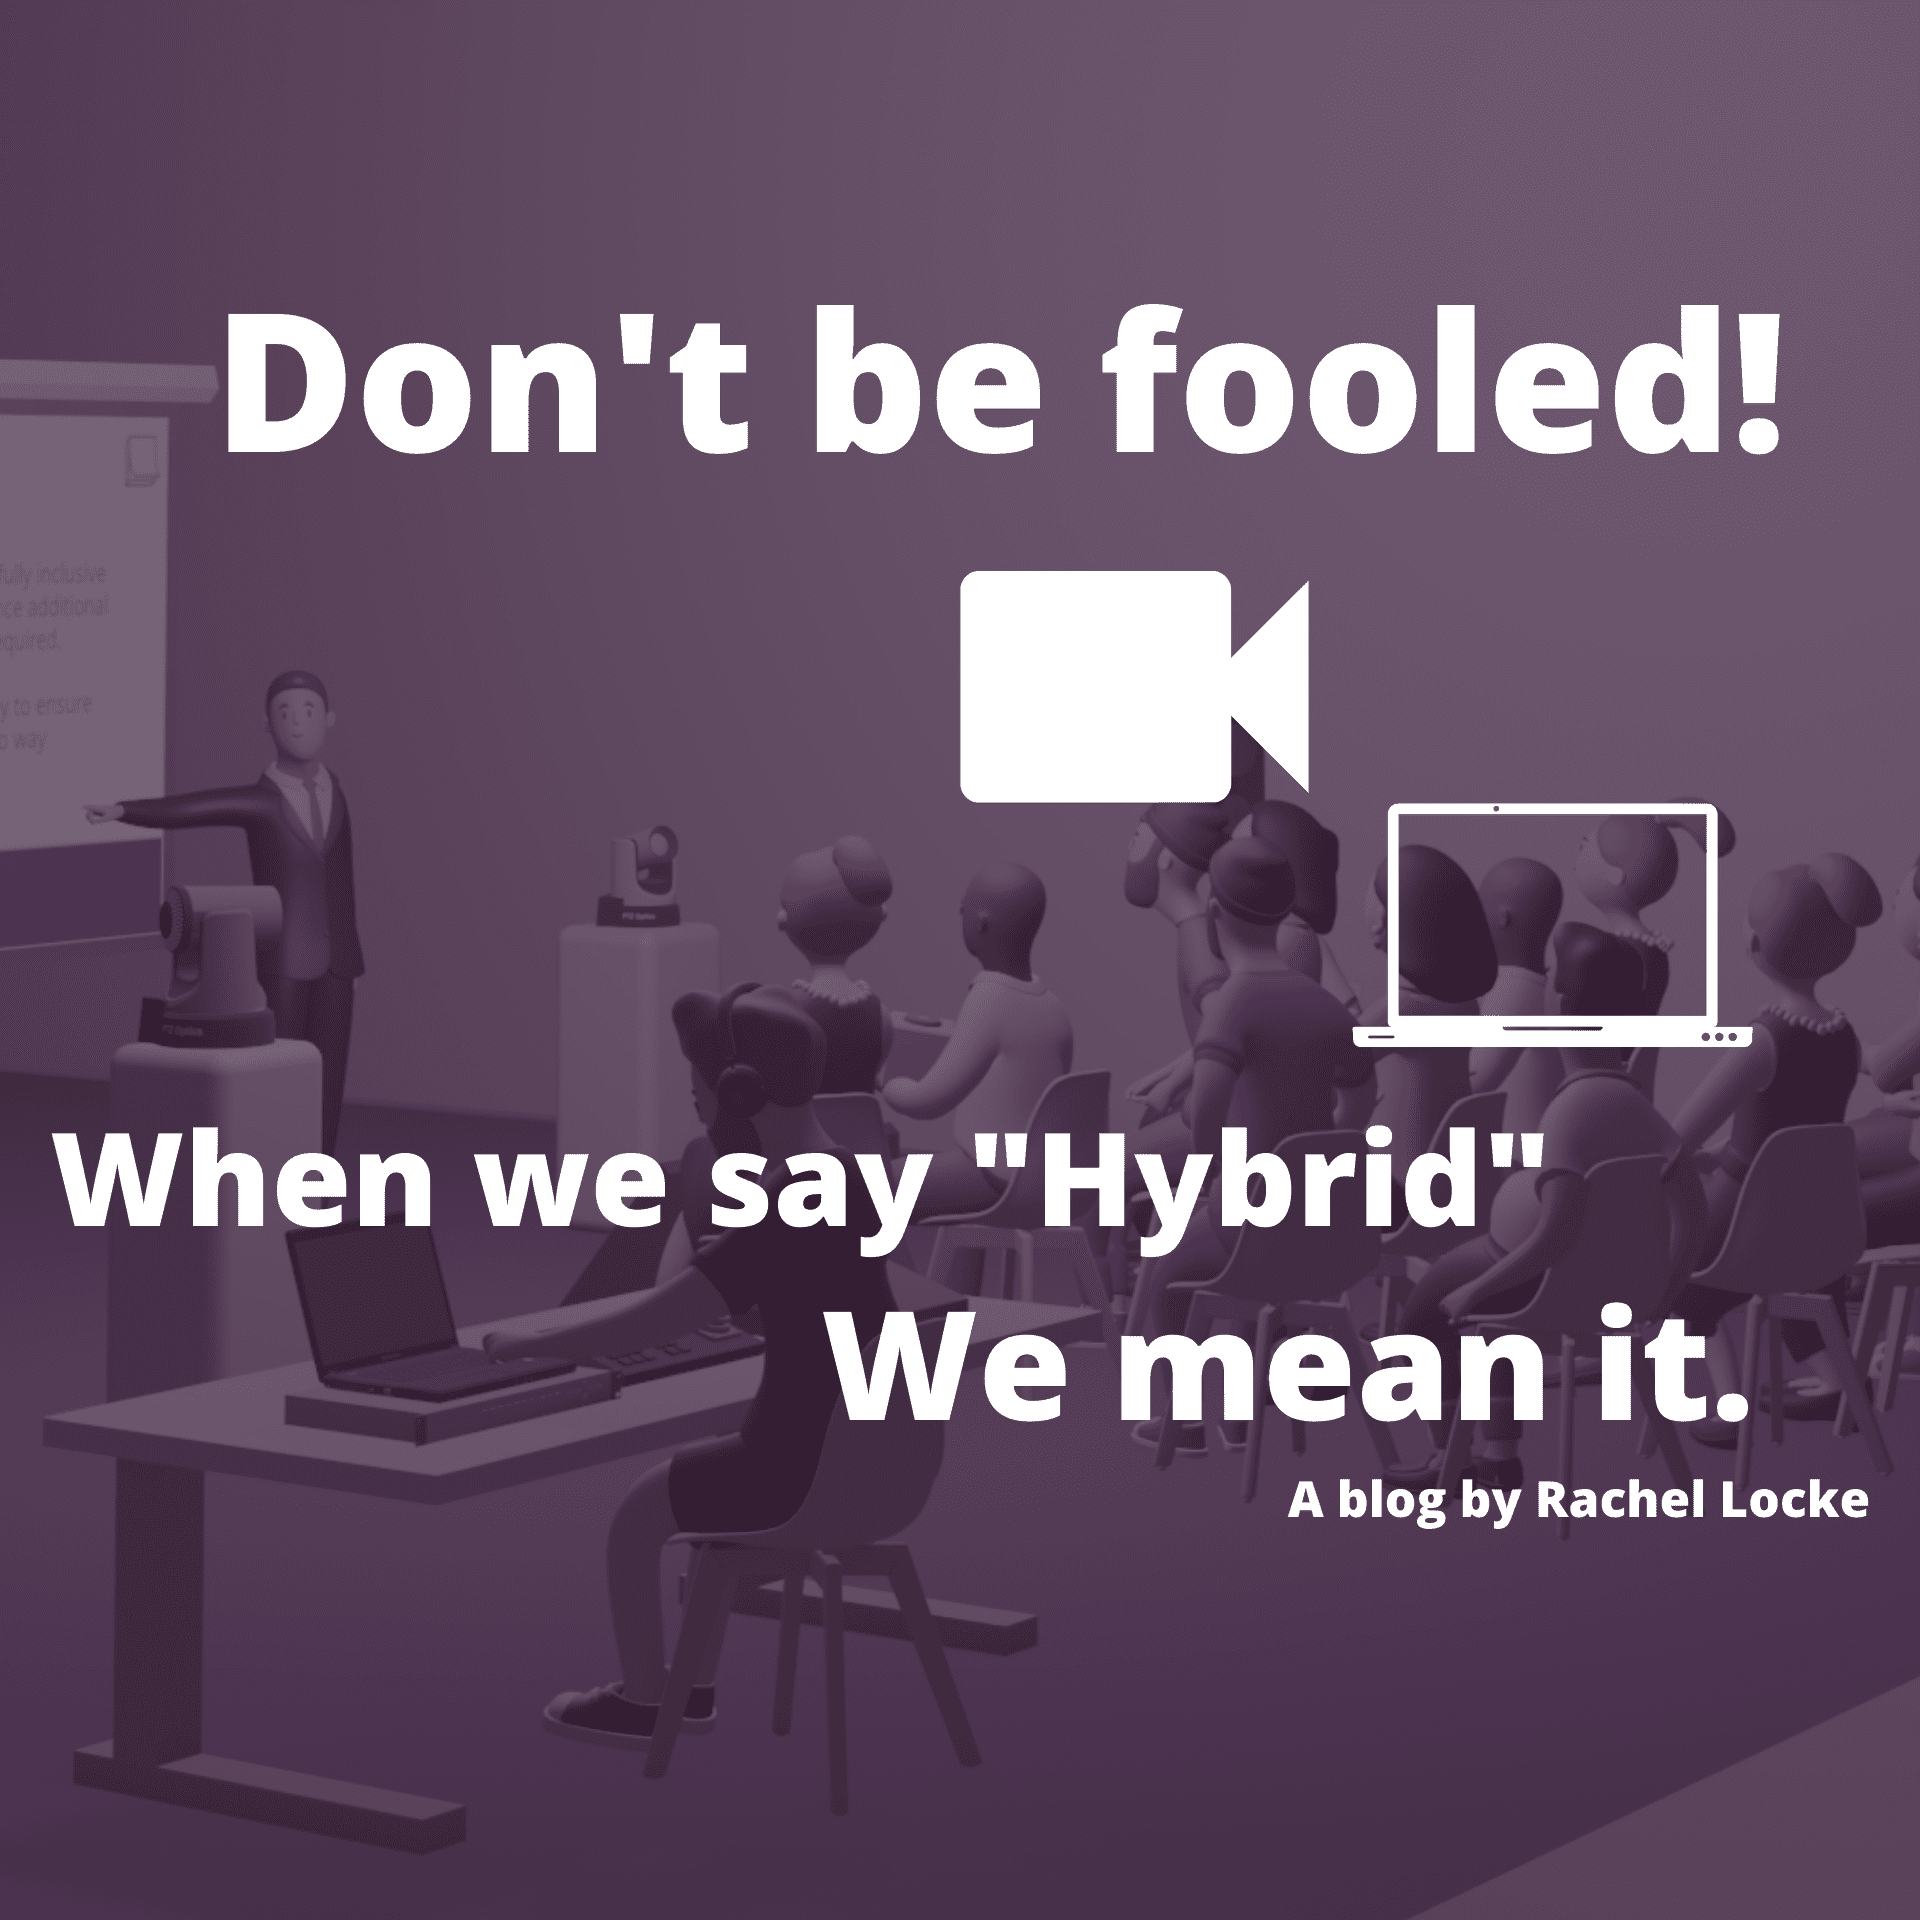 Don’t Be Fooled – When we say “hybrid”, we mean it.